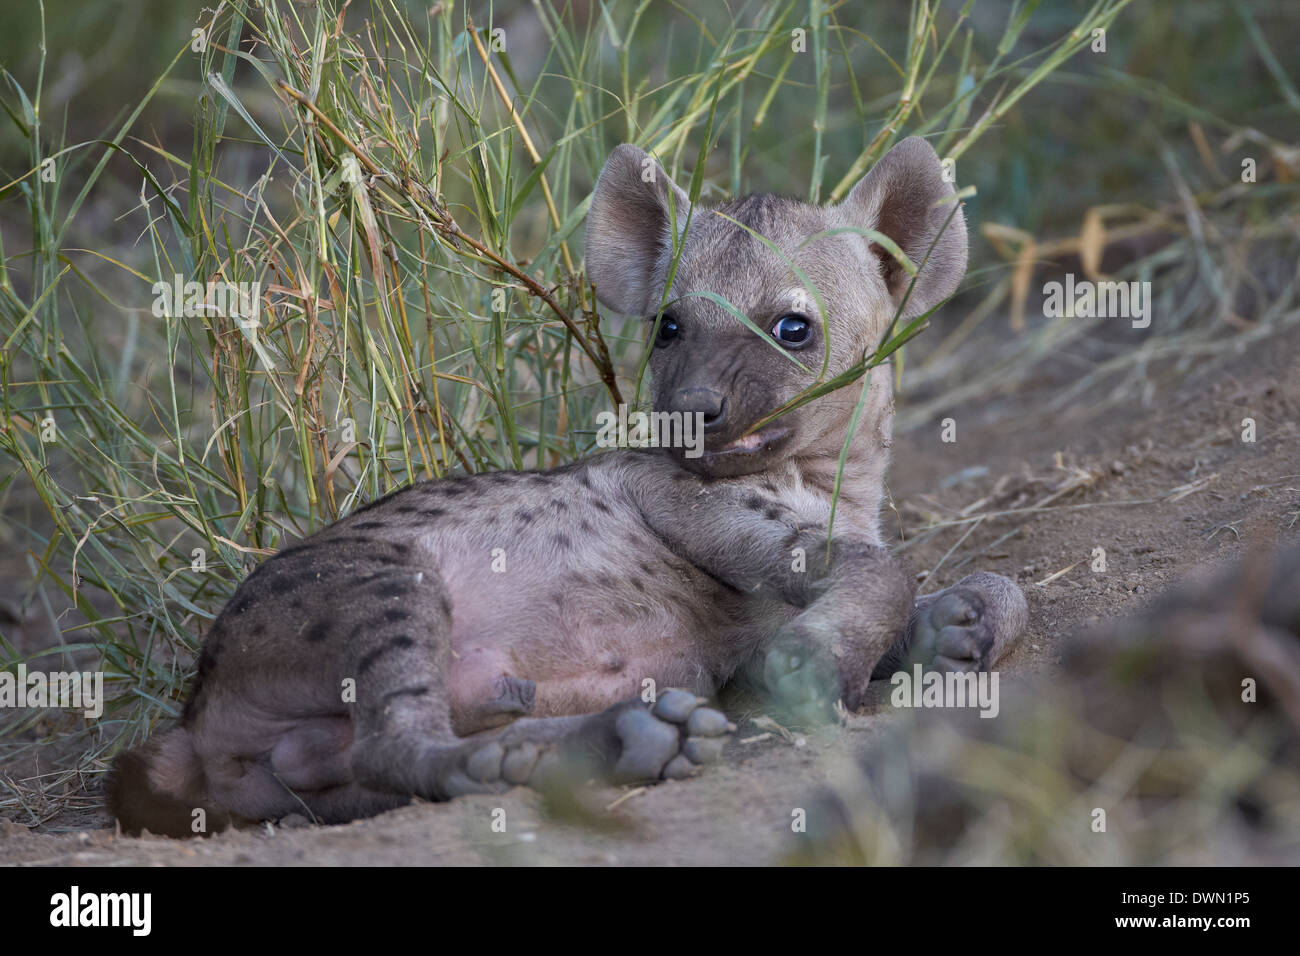 Spotted Hyena (Spotted Hyaena) (Crocuta crocuta) pup playing, Kruger National Park, South Africa, Africa Stock Photo